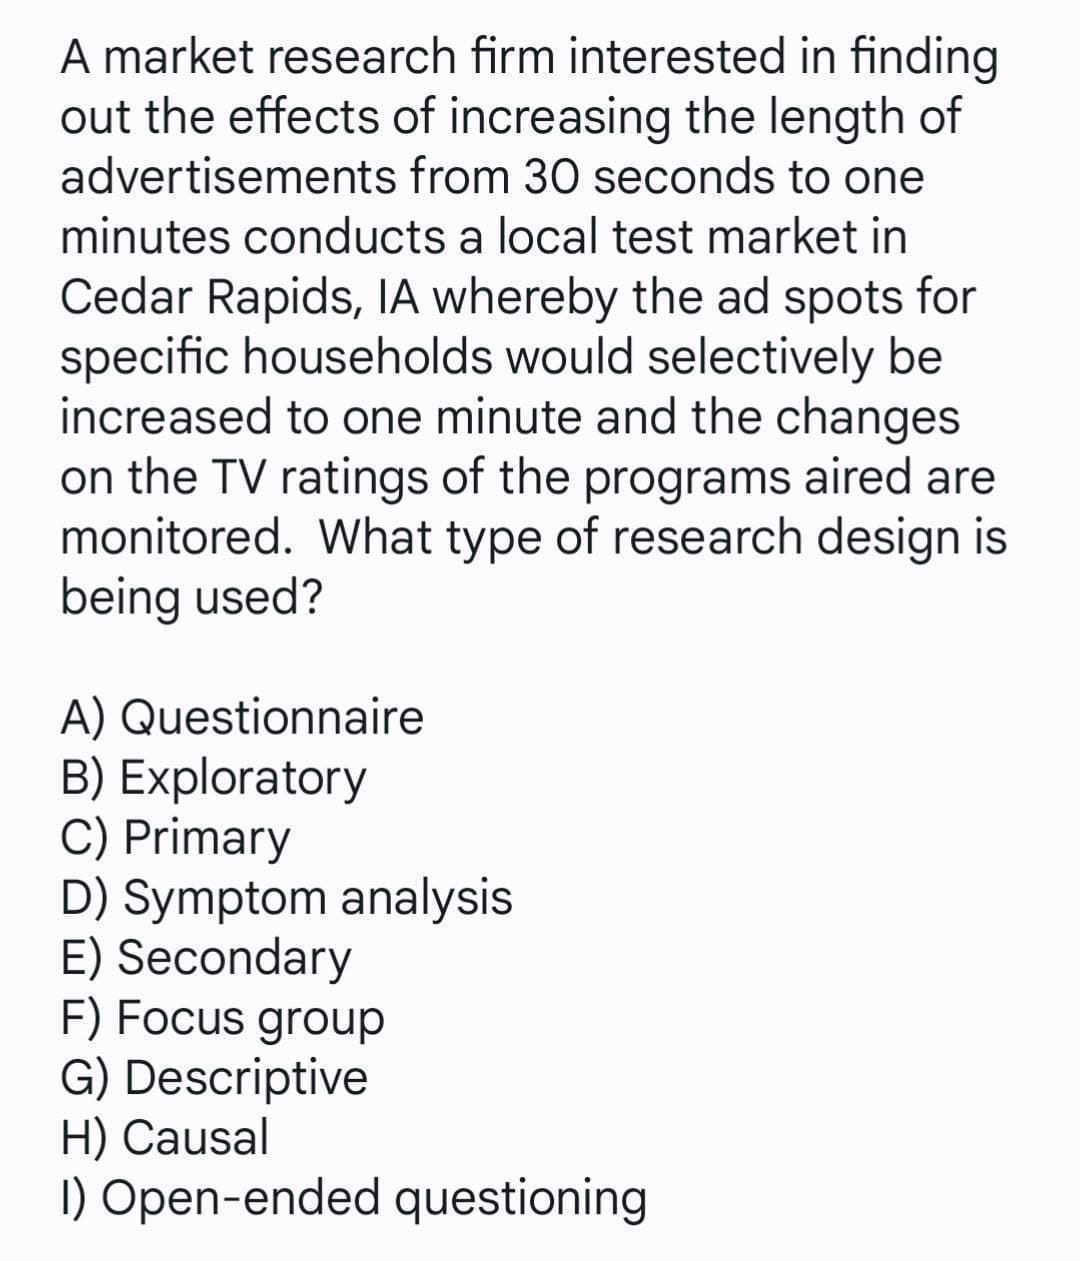 A market research firm interested in finding
out the effects of increasing the length of
advertisements from 30 seconds to one
minutes conducts a local test market in
Cedar Rapids, lA whereby the ad spots for
specific households would selectively be
increased to one minute and the changes
on the TV ratings of the programs aired are
monitored. What type of research design is
being used?
A) Questionnaire
B) Exploratory
C) Primary
D) Symptom analysis
E) Secondary
F) Focus group
G) Descriptive
H) Causal
I) Open-ended questioning
